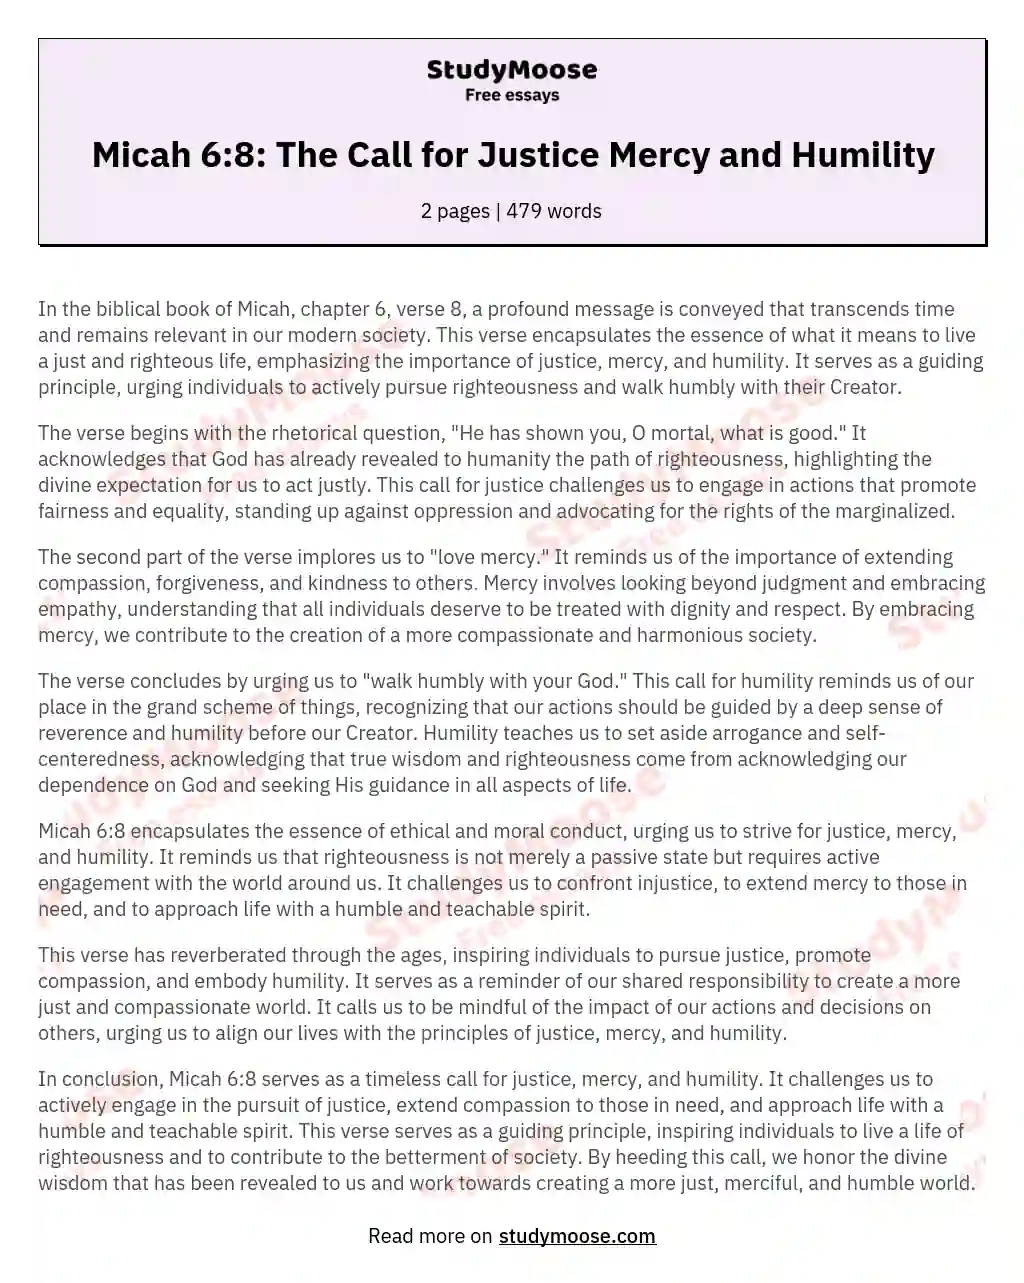 Micah 6:8: The Call for Justice Mercy and Humility essay